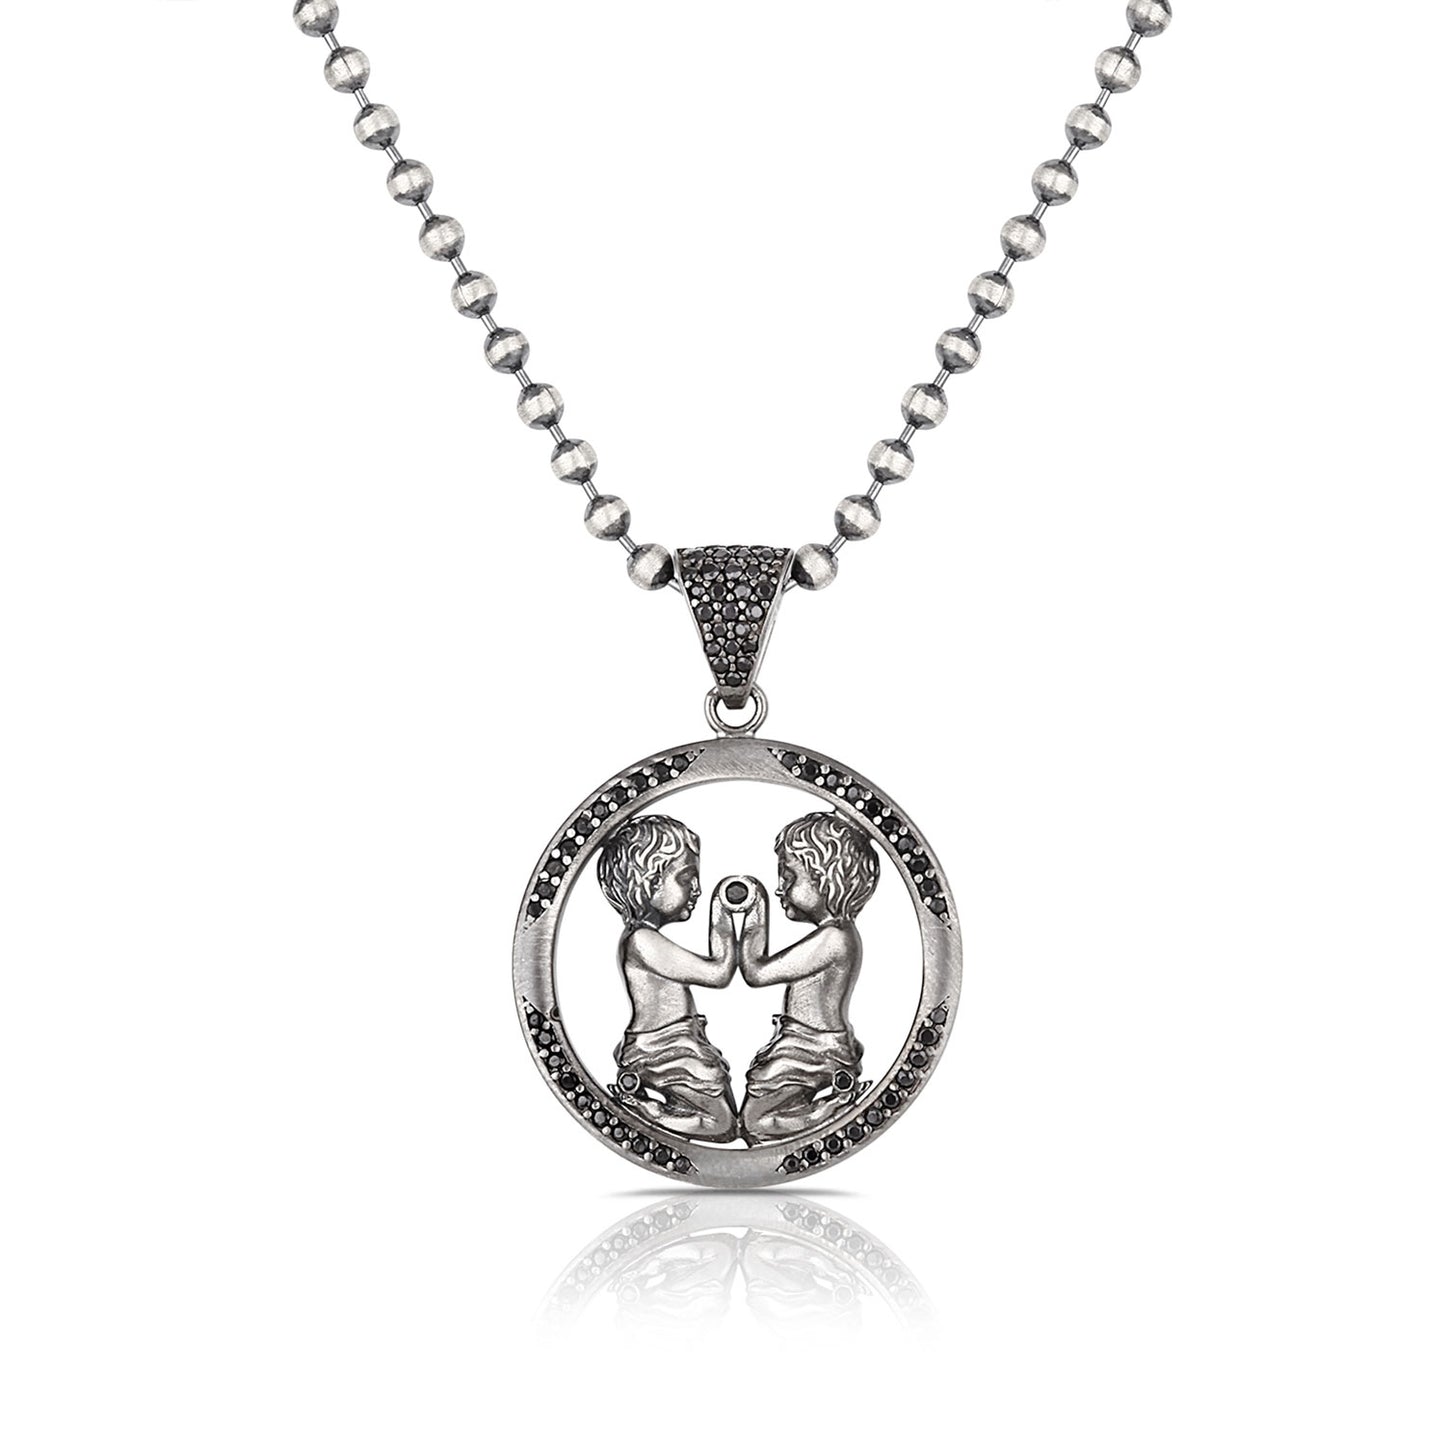 RARE PRINCE by CARAT SUTRA | Unique Gemini Zodiac Designed Pendant Studded with Black Zircons | Unisex 925 Sterling Silver Oxidized Pendant | Men's Jewelry | With Certificate of Authenticity and 925 Hallmark - caratsutra